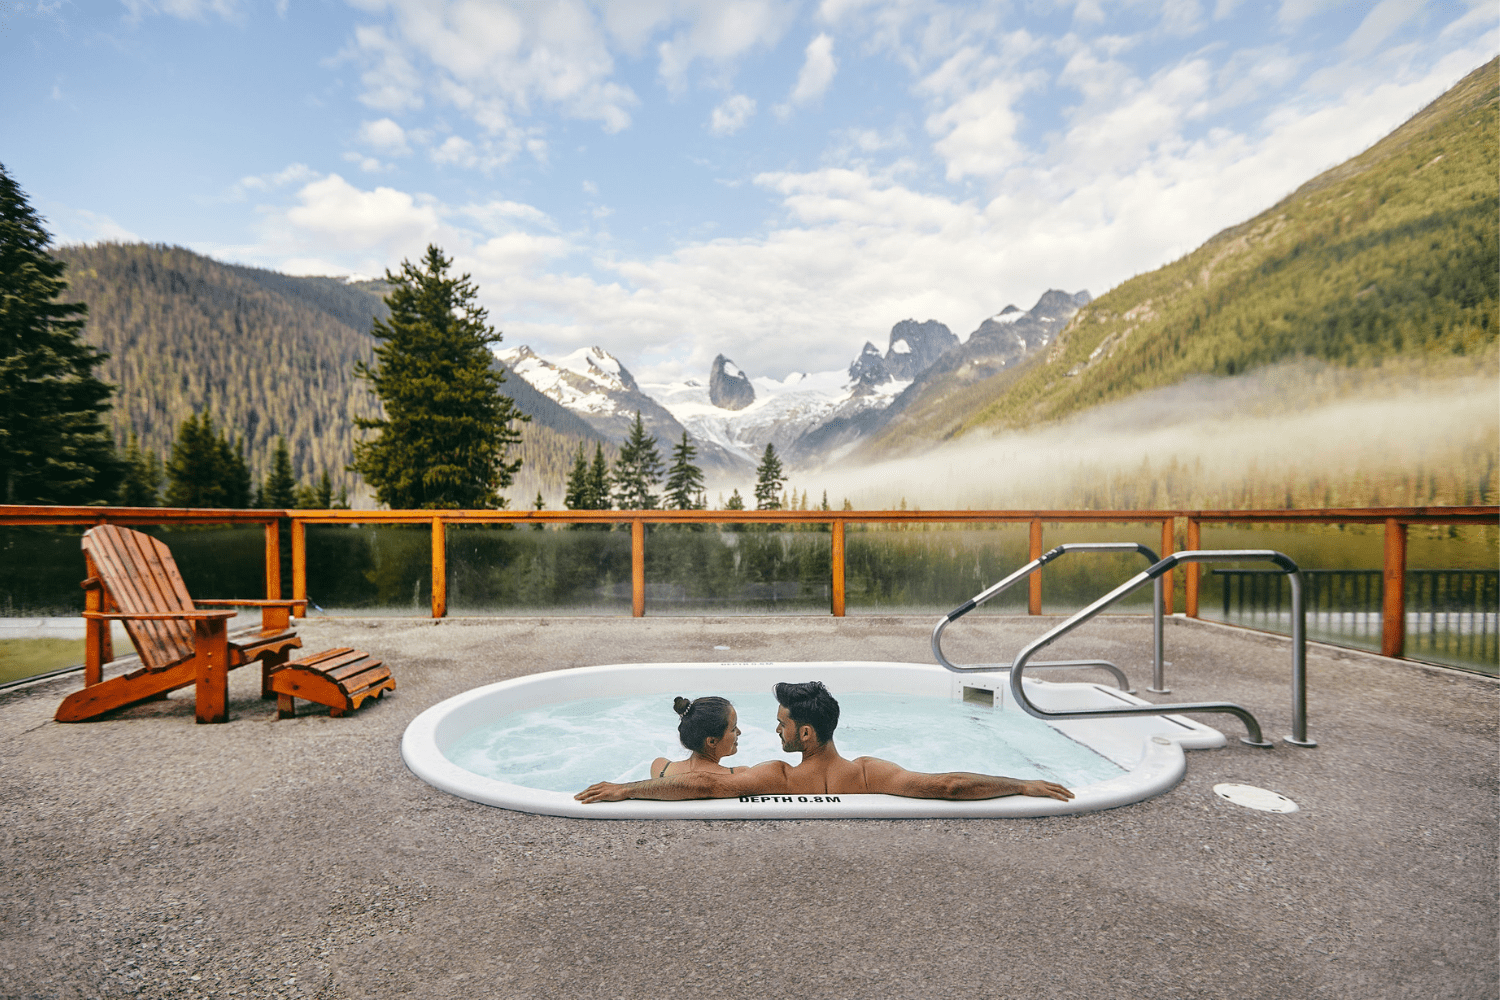 Couple in Jacuzzi in the mountains